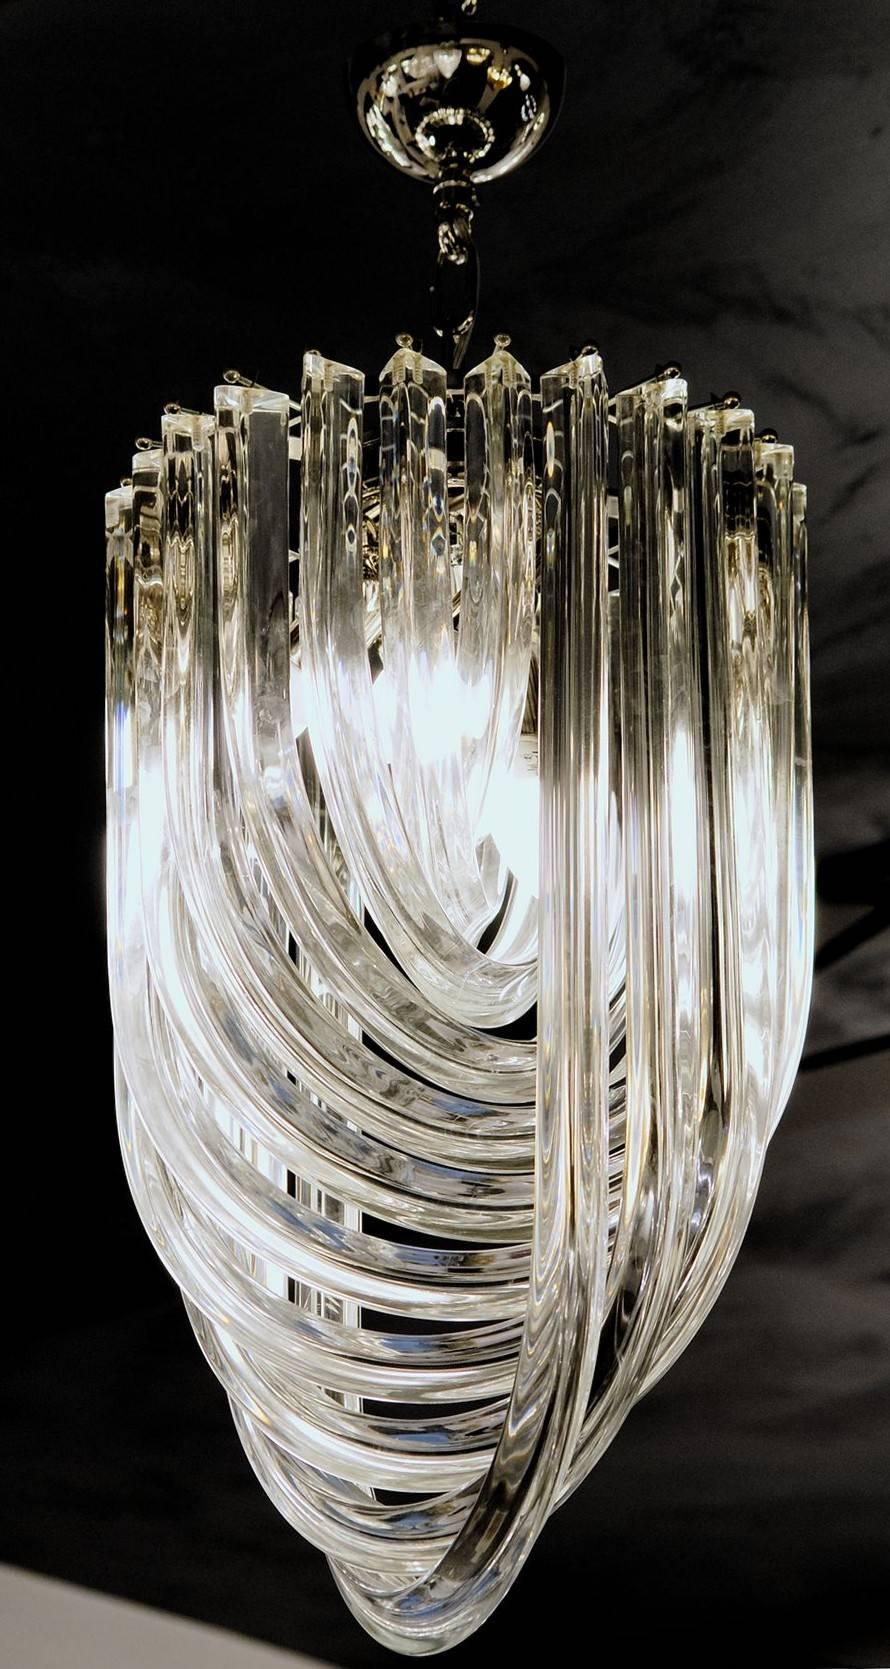 Please note price indicated is for the unit not the set.

This is a set of four masterpiece midcentury chandeliers from Murano, designed by Carlo Nason. Great play with the light. Designed in the 1970s. The use of the triedri elements had been